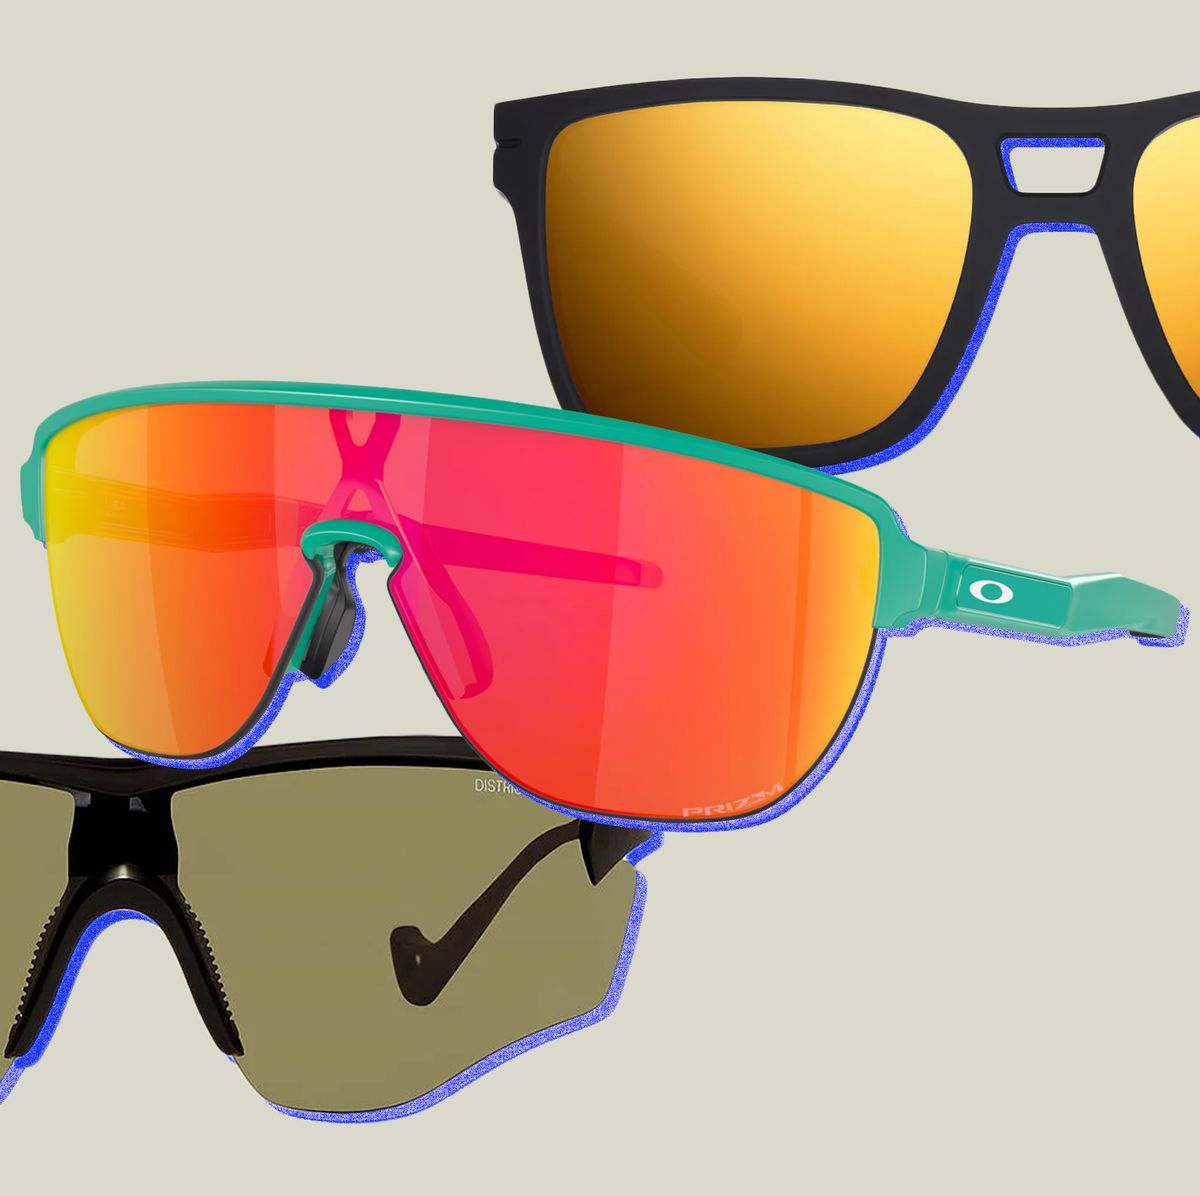 Which Oakley Style Should You Choose?